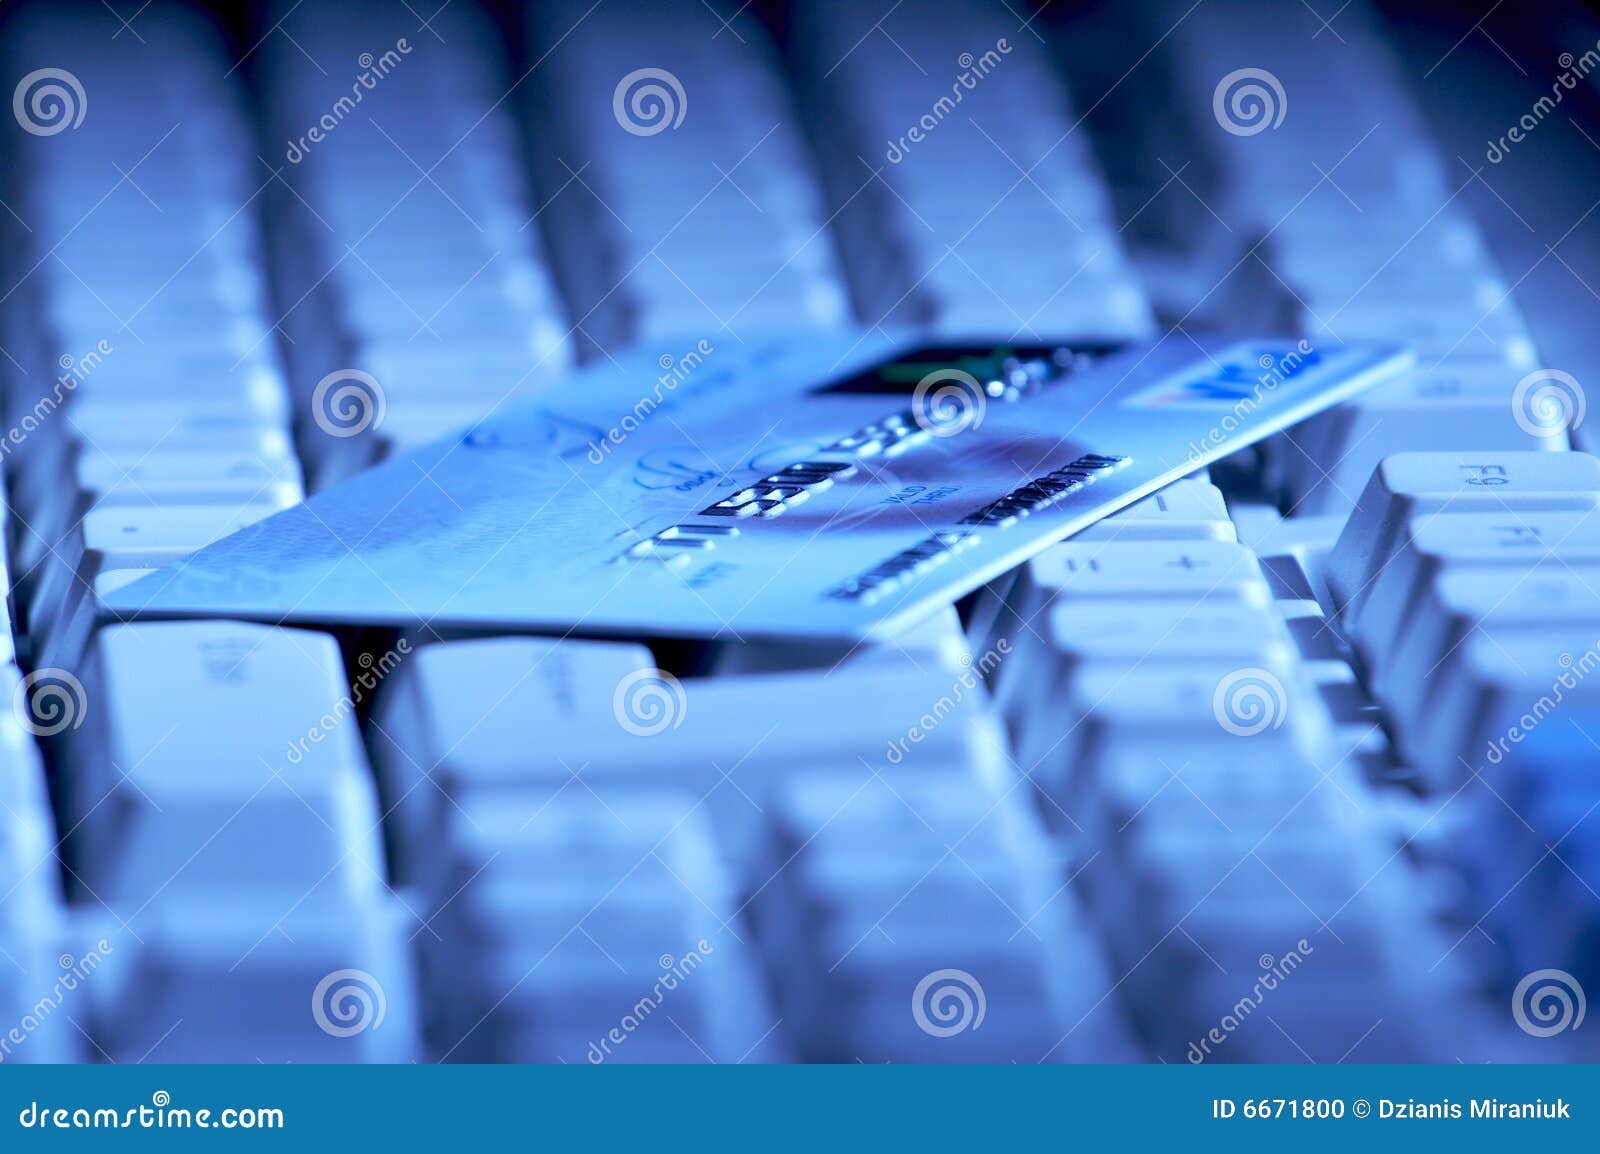 creditcard ready for payment on the keyboard